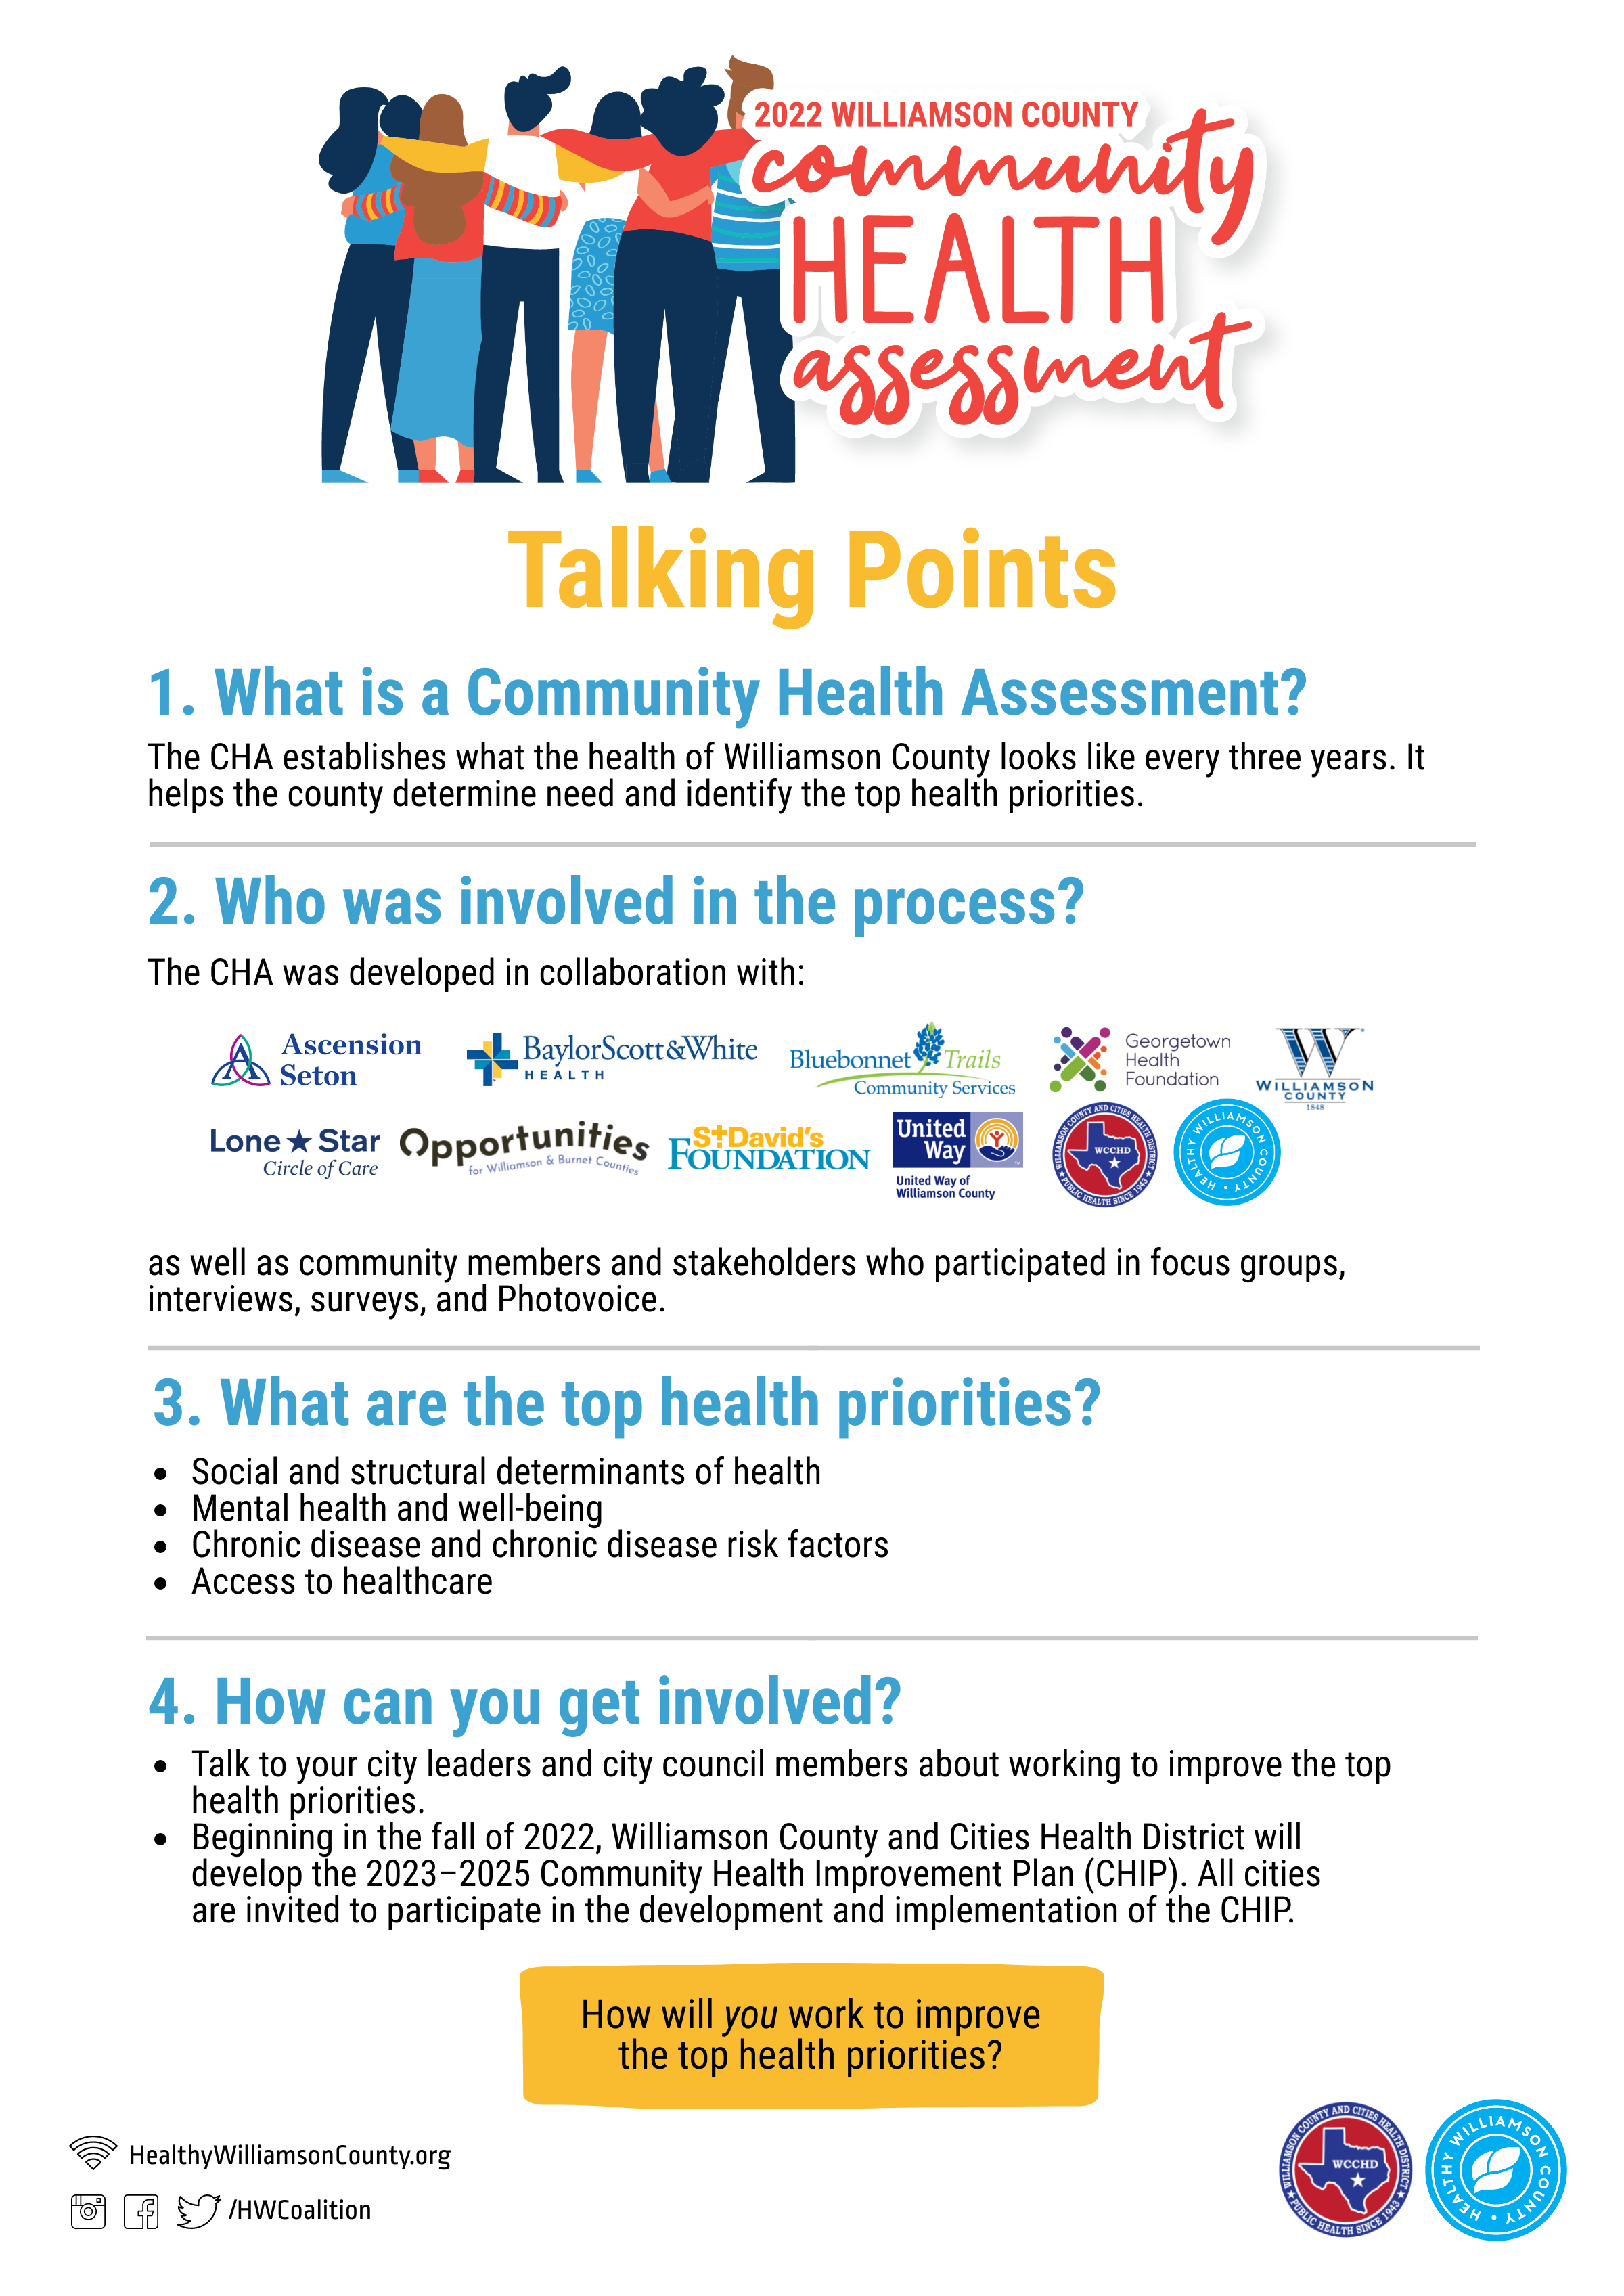 2022 Williamson County Community Health Assessment Talking Points Infographic